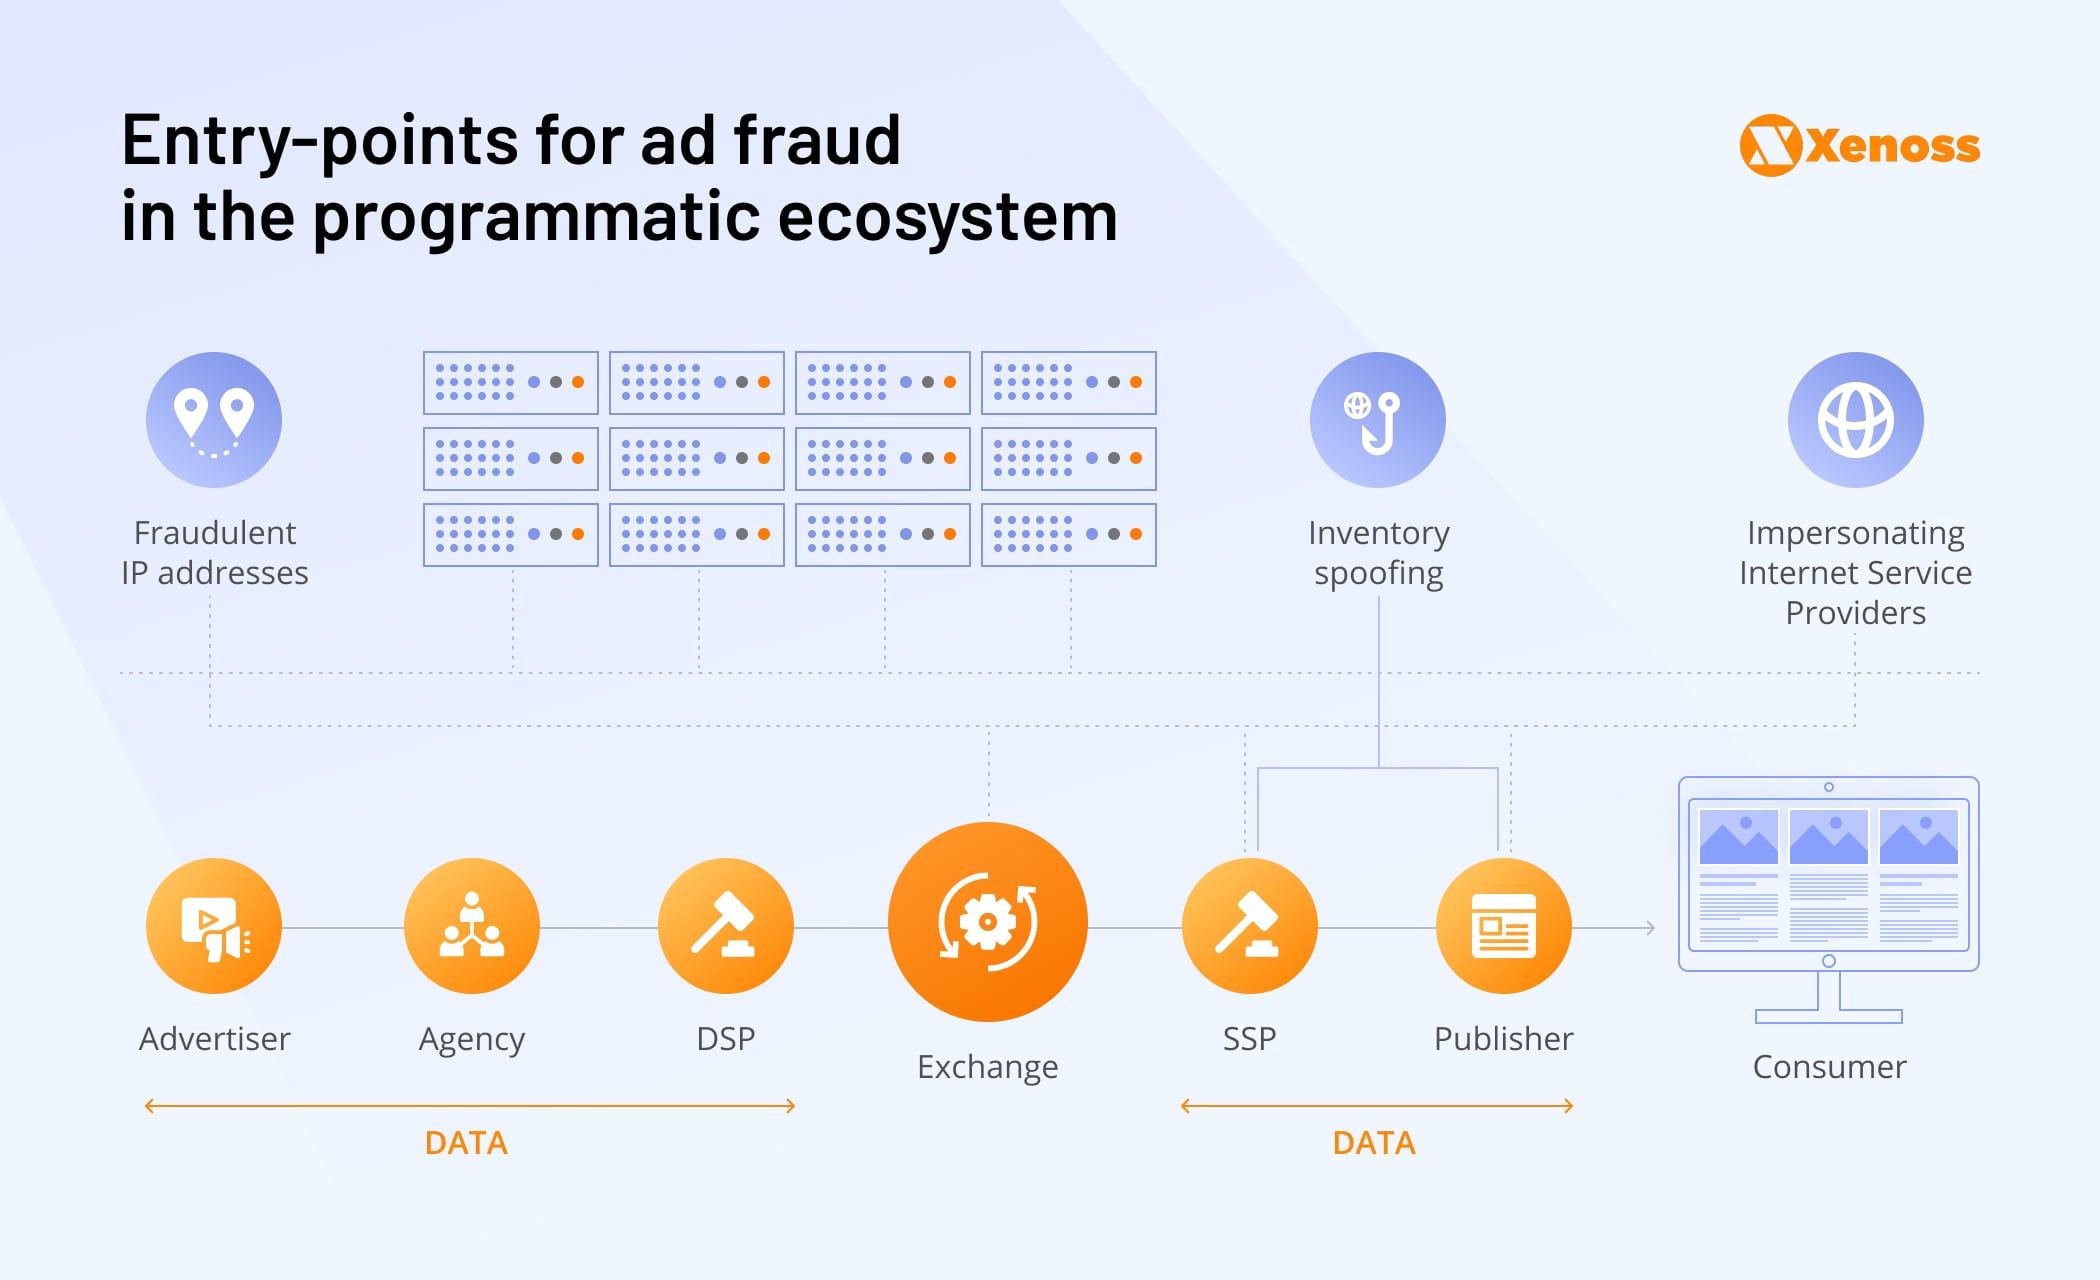 Entry-points for ad fraud in the programmatic ecosystem